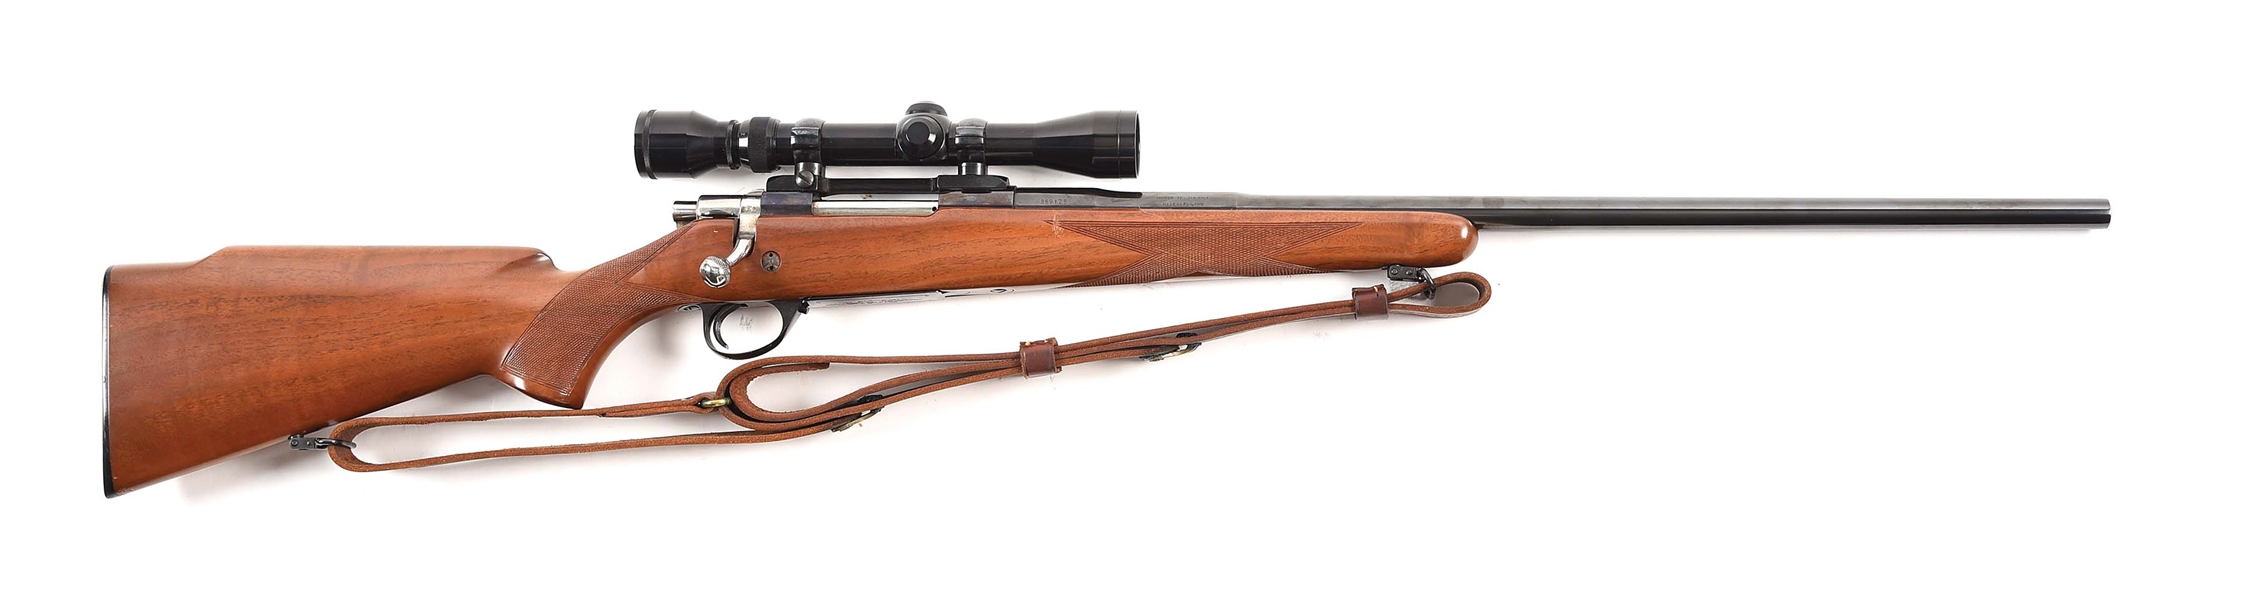 (M) BROWNING SAFARI .22-250 BOLT ACTION RIFLE WITH BROWNING SCOPE, MANUFACTURED 1969.